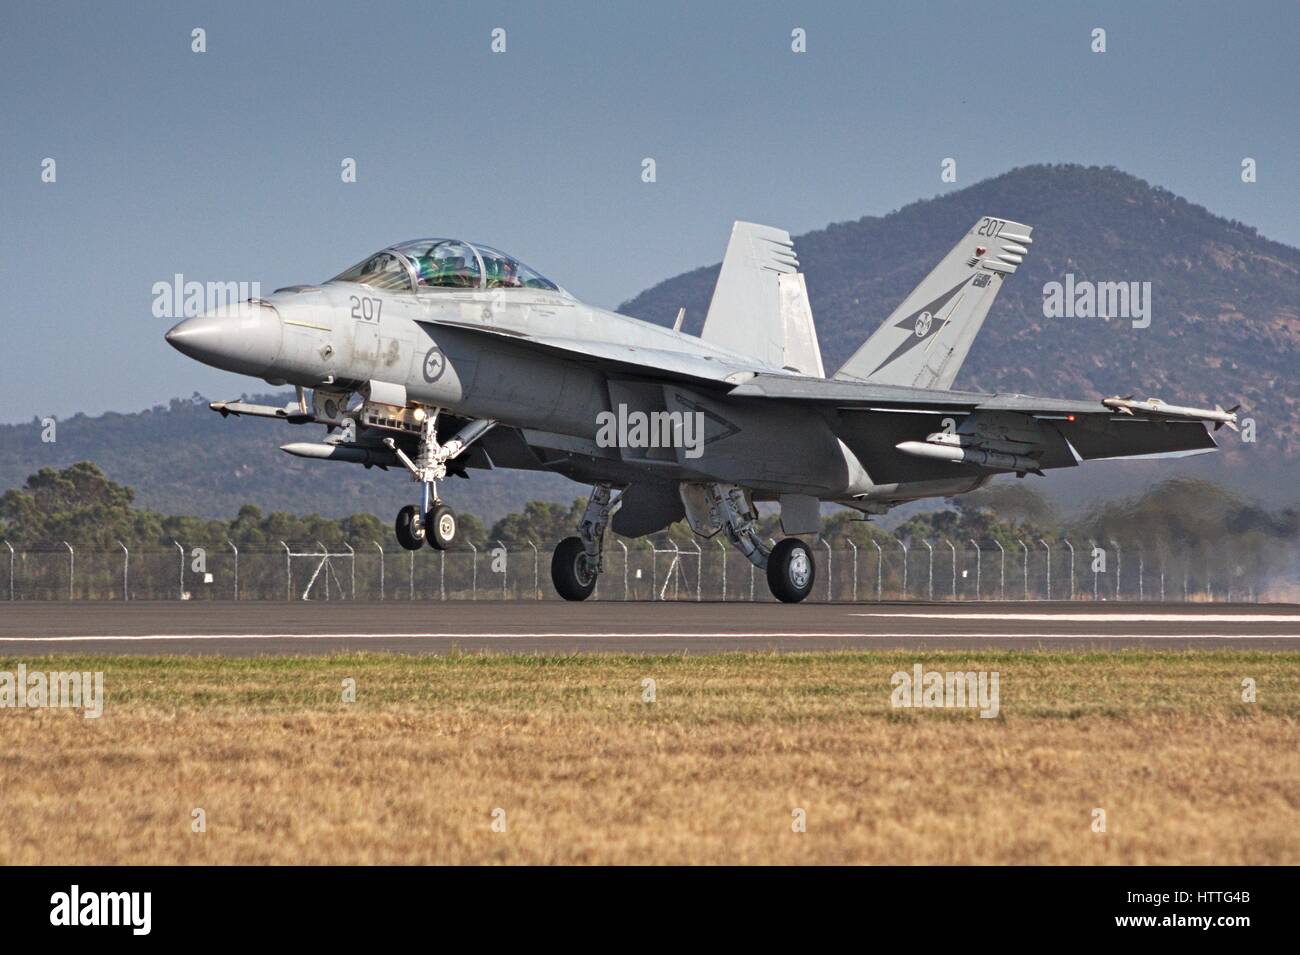 F/A-18F Super Hornet lifting off on the runway at the Avalon airshow, Melbourne, Australia, 2017. Stock Photo